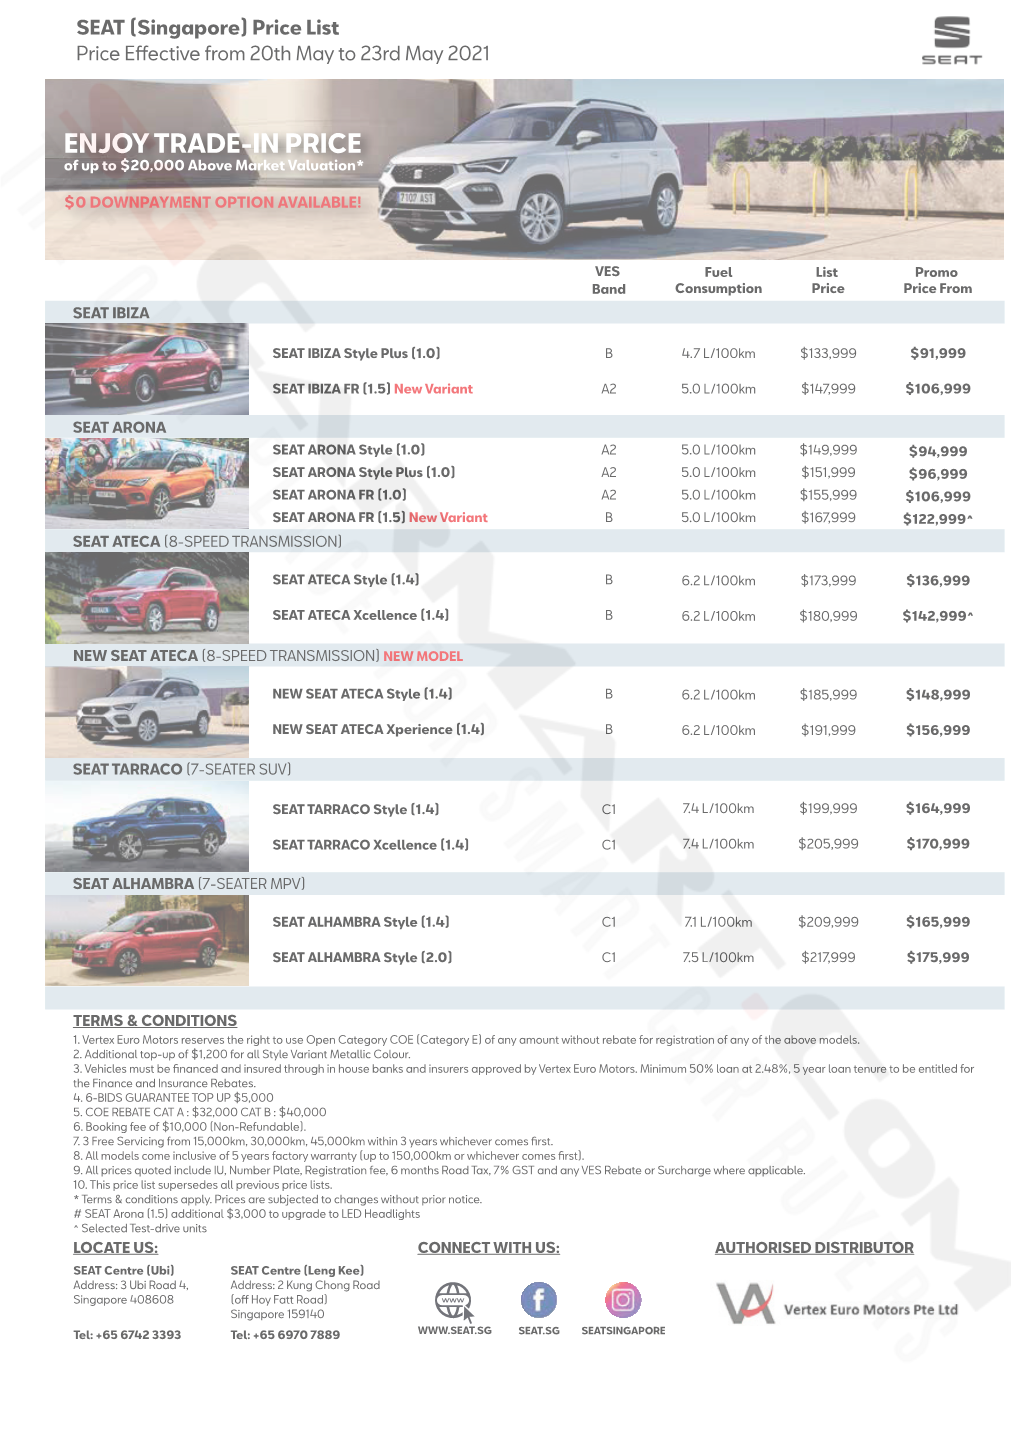 SEAT Pricelist May 2021 (2021-05-21)